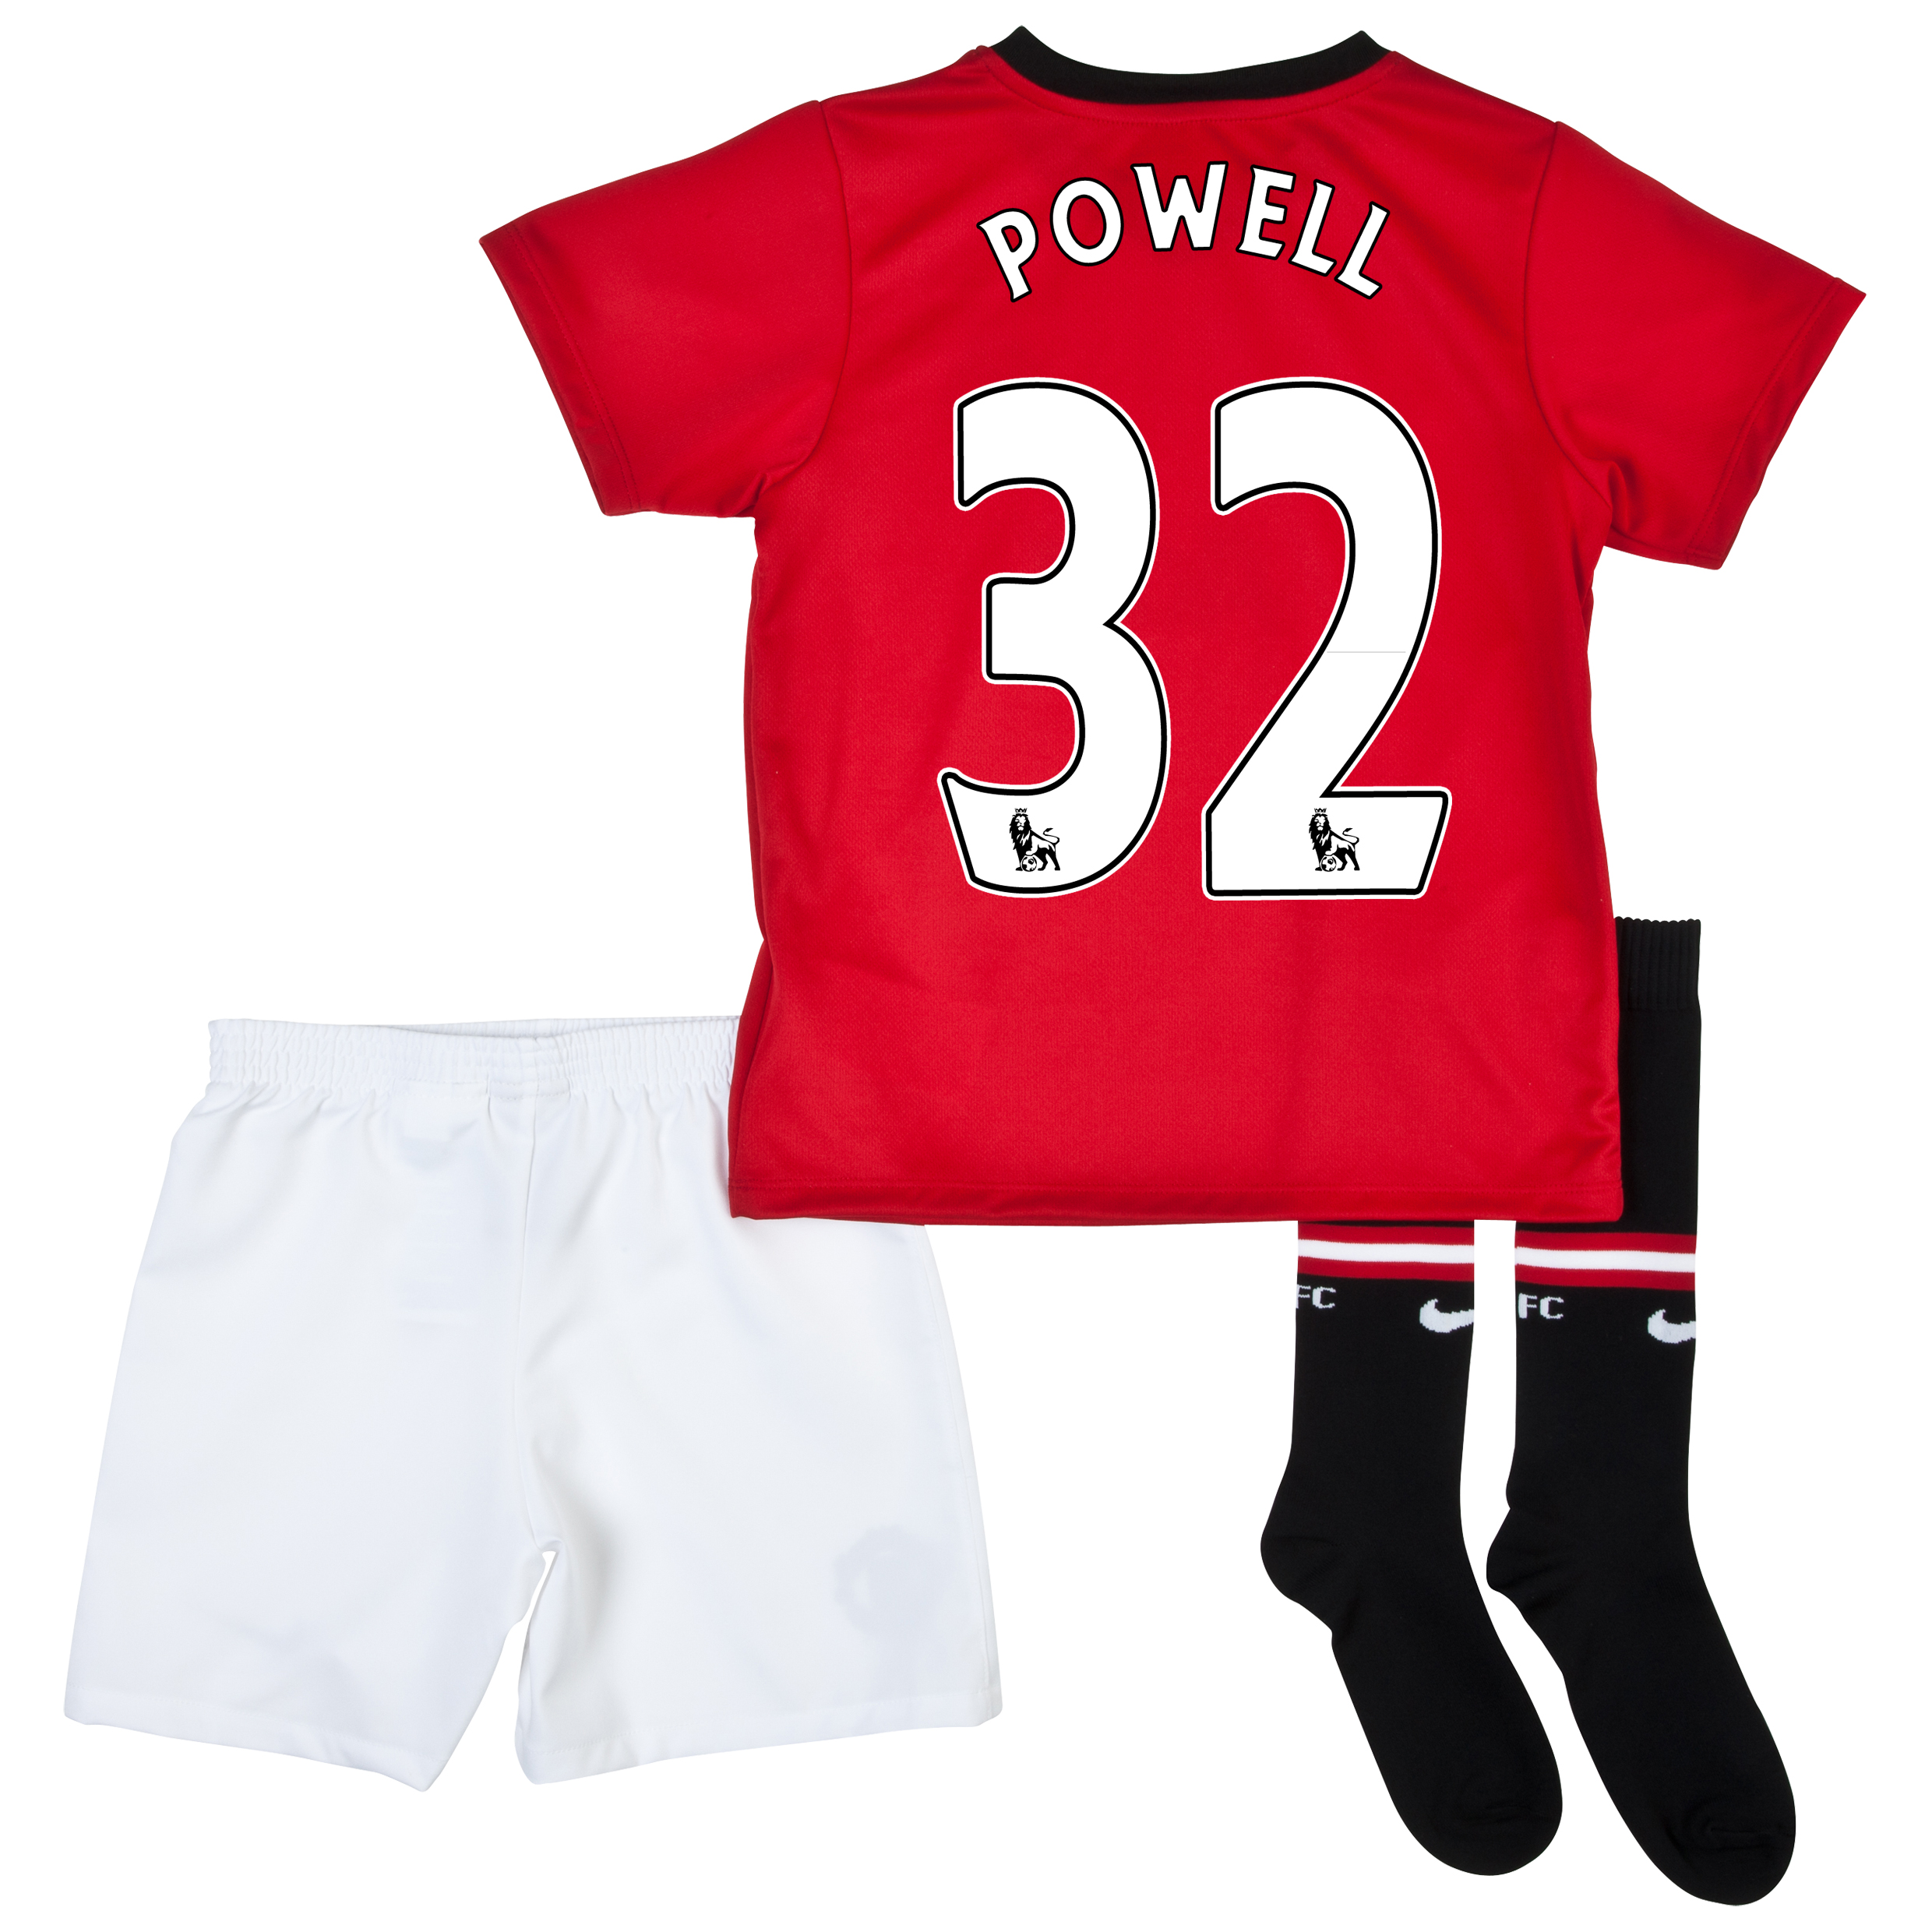 Manchester United Home Kit 2013/14 - Little Boys with Powell 32 printing